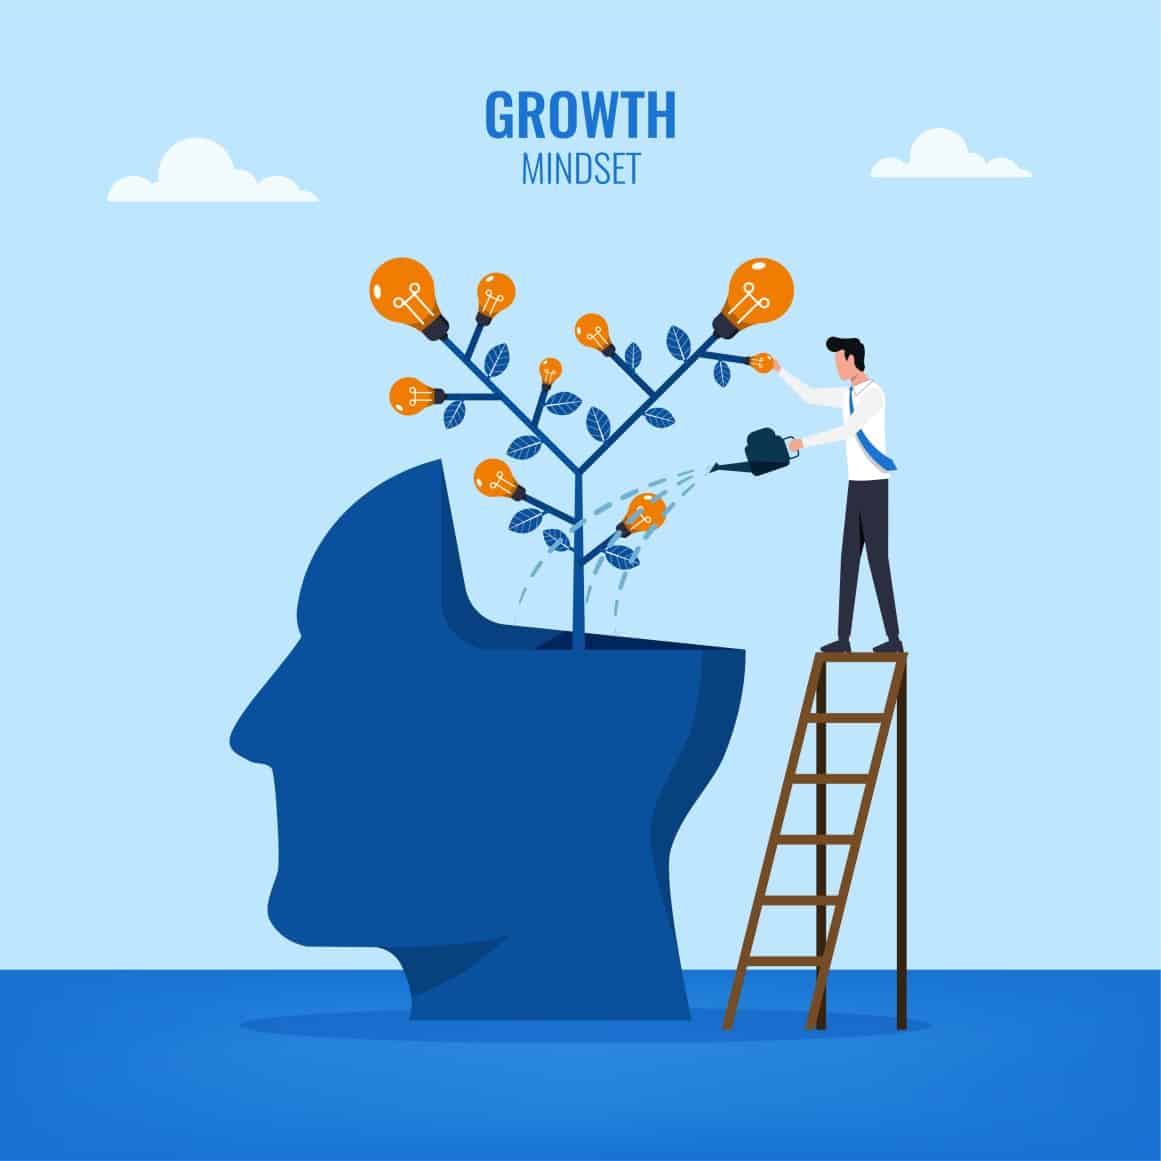 What Having a “Growth Mindset” Actually Means